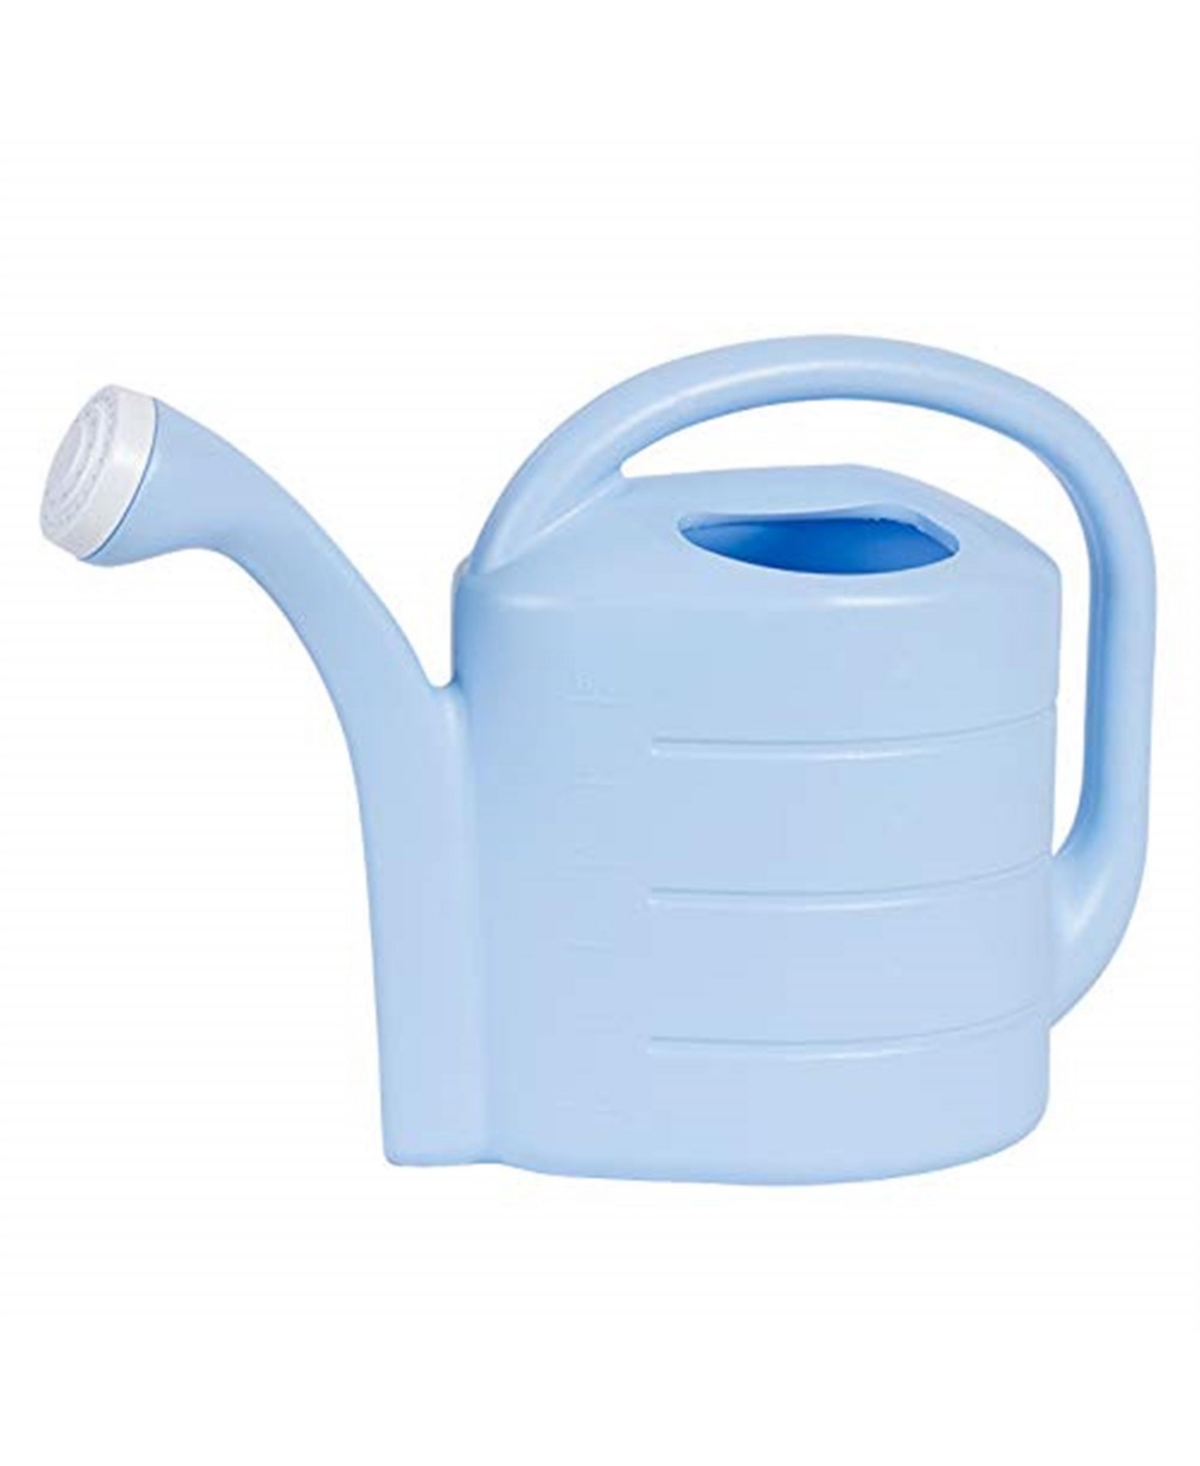 Deluxe Plastic Watering Can, Sky Blue, 2 Gallons - Blue